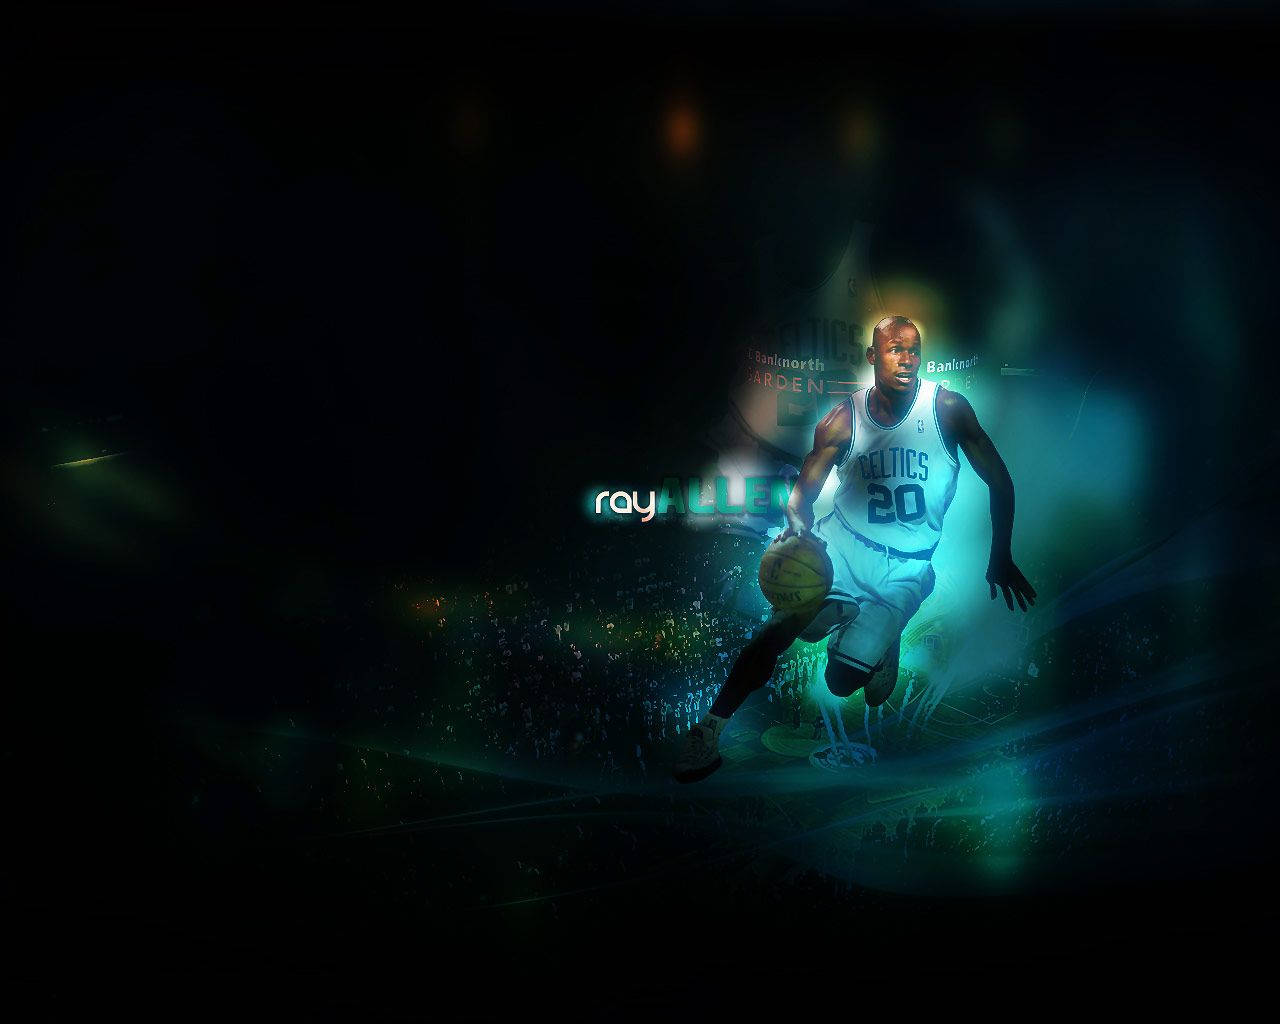 Ray Allen Basketball Dribble Expression Background